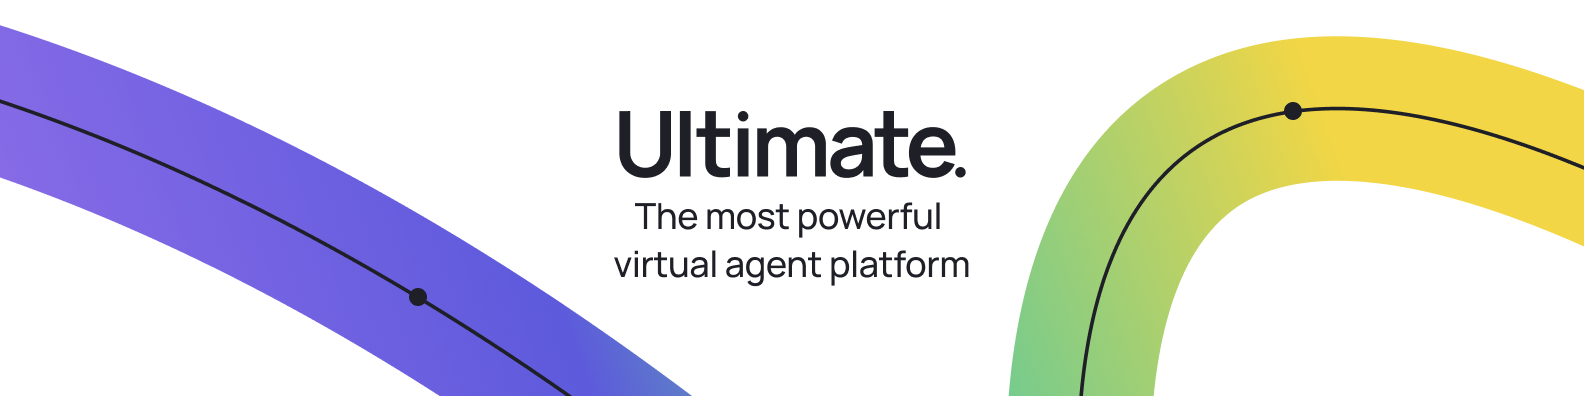 Ultimate. / startup from Berlin / Background